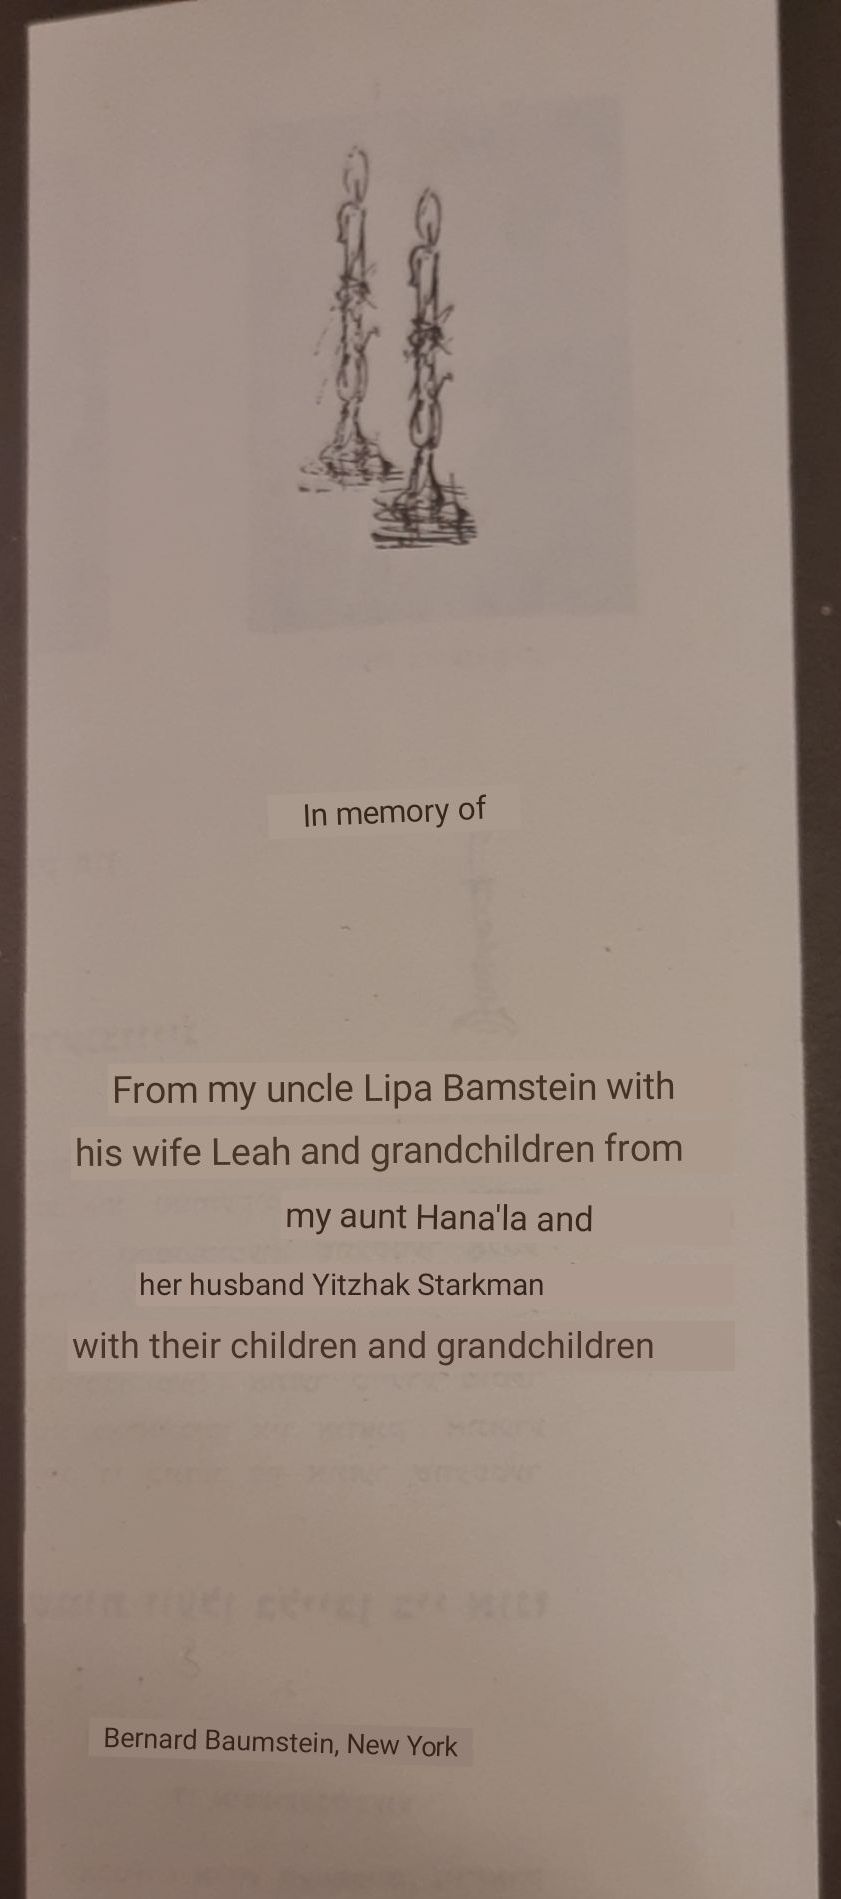 Translations of Memorial Ad donated by Bernard Baumstein about Lipa and other relatives -Yizkor Book 1971